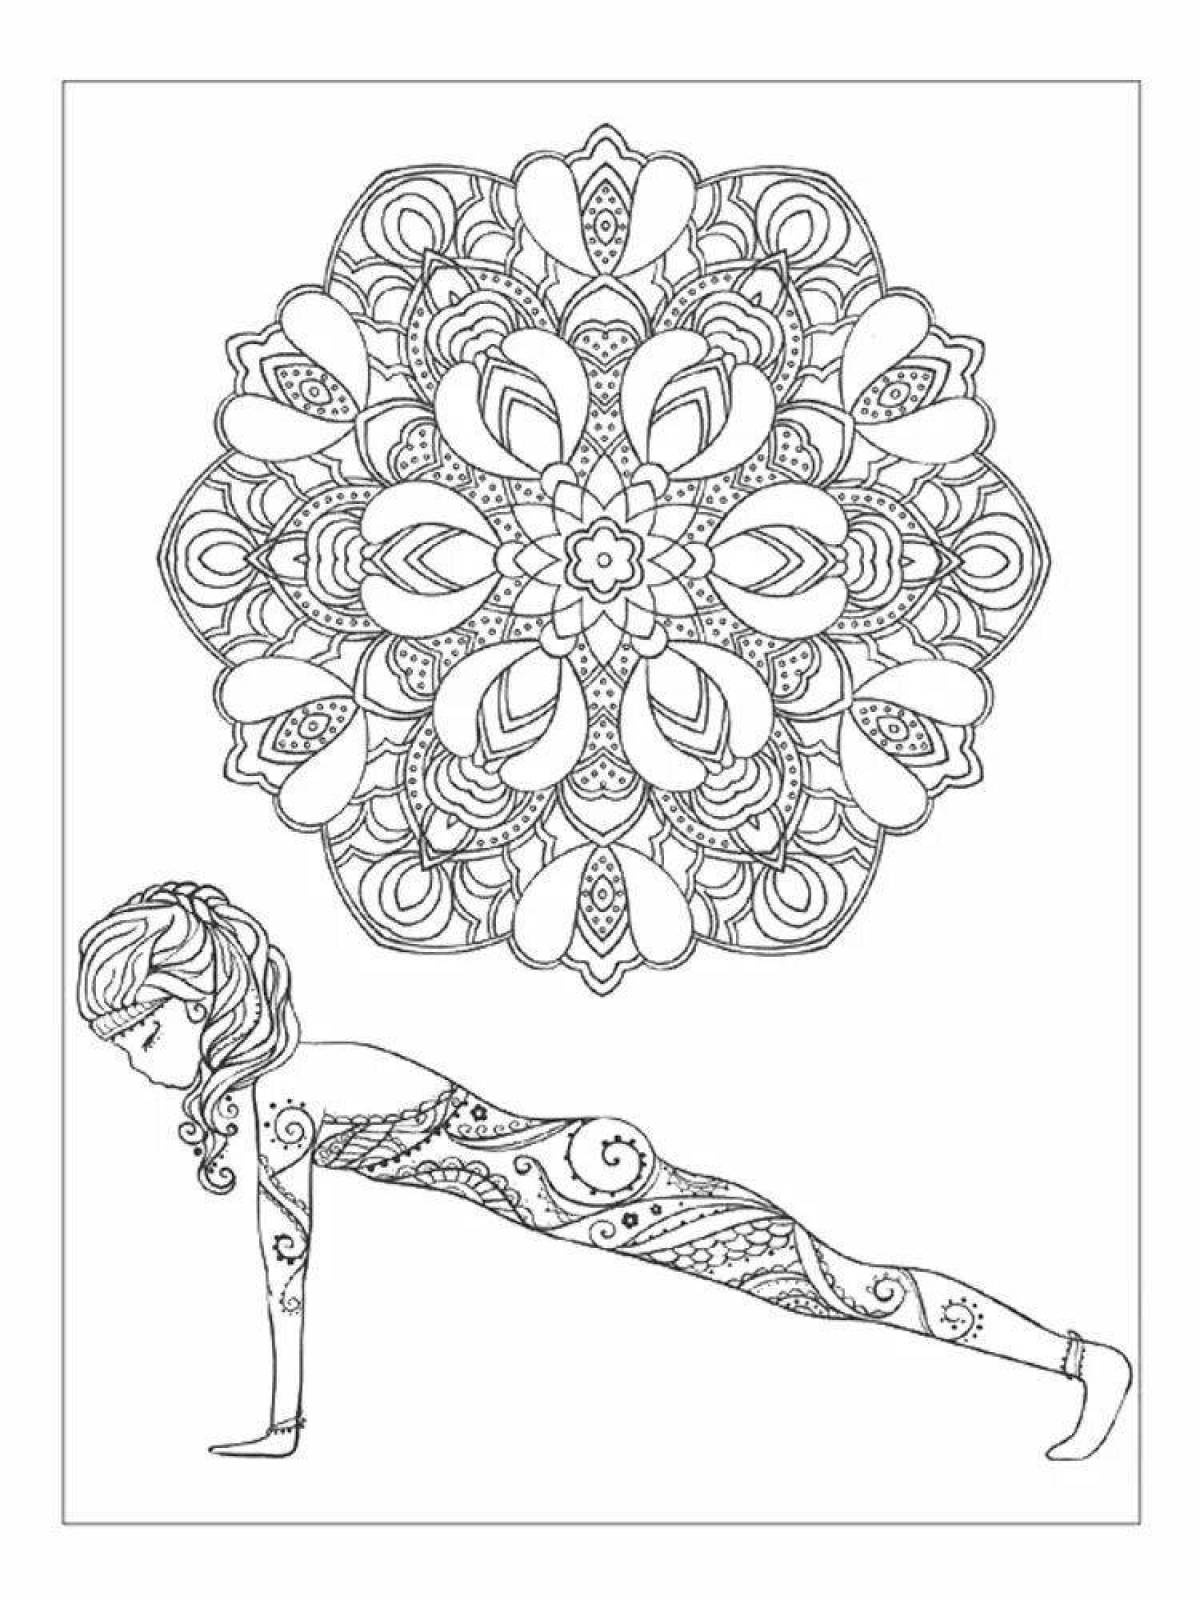 Exciting coloring book antistress art yoga